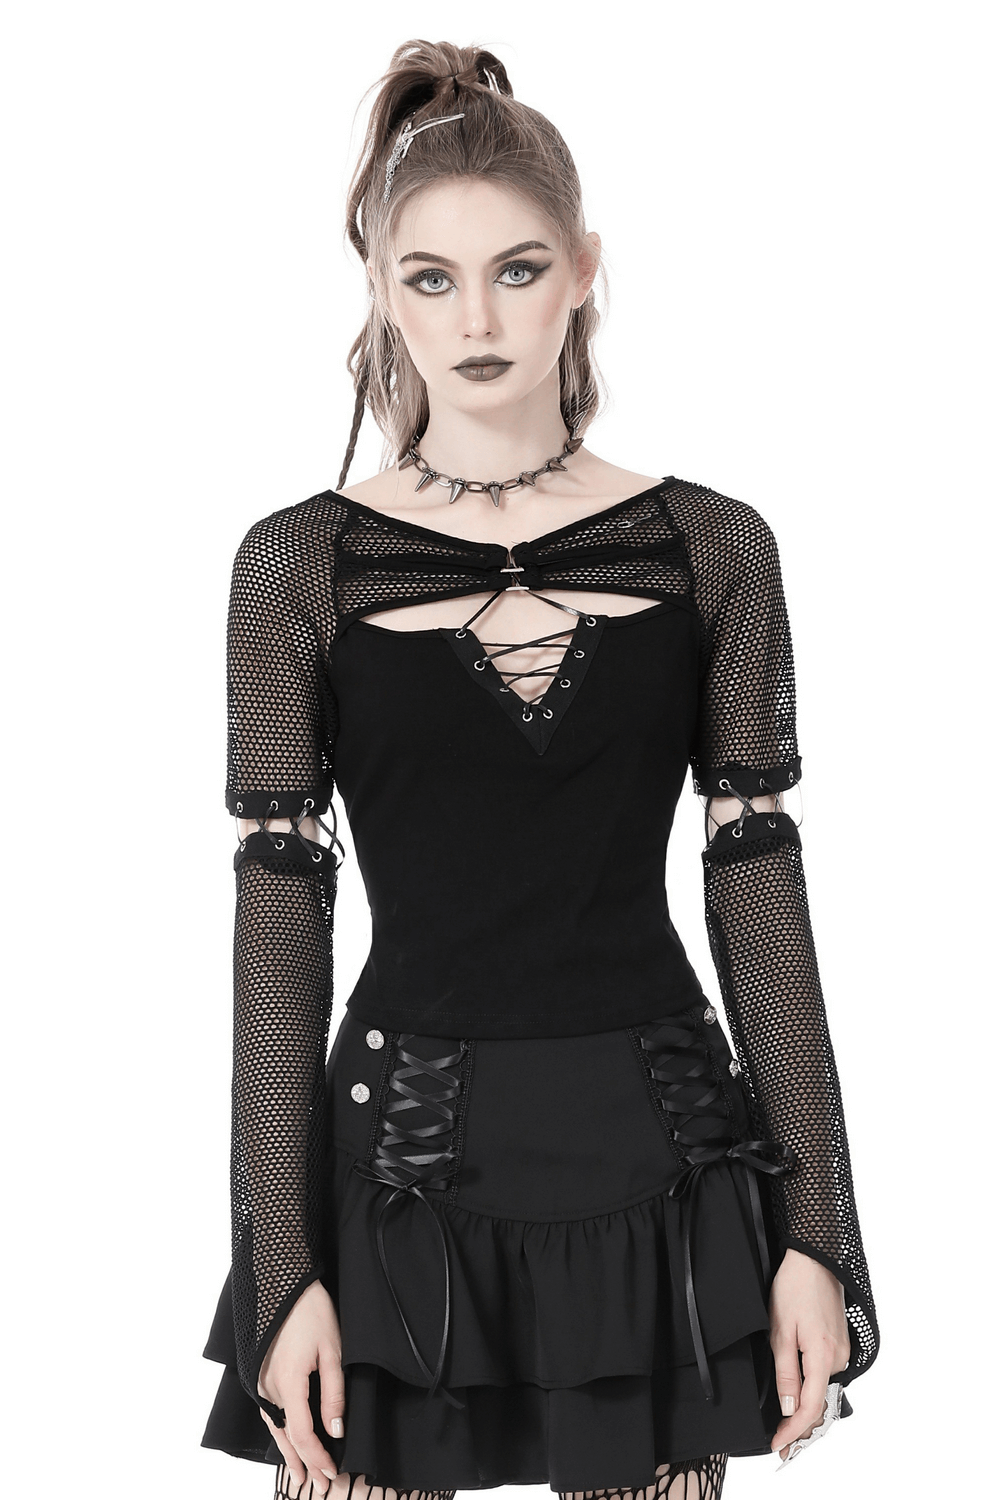 Stylish Female Mesh Goth Top with Lace-Up Sleeves